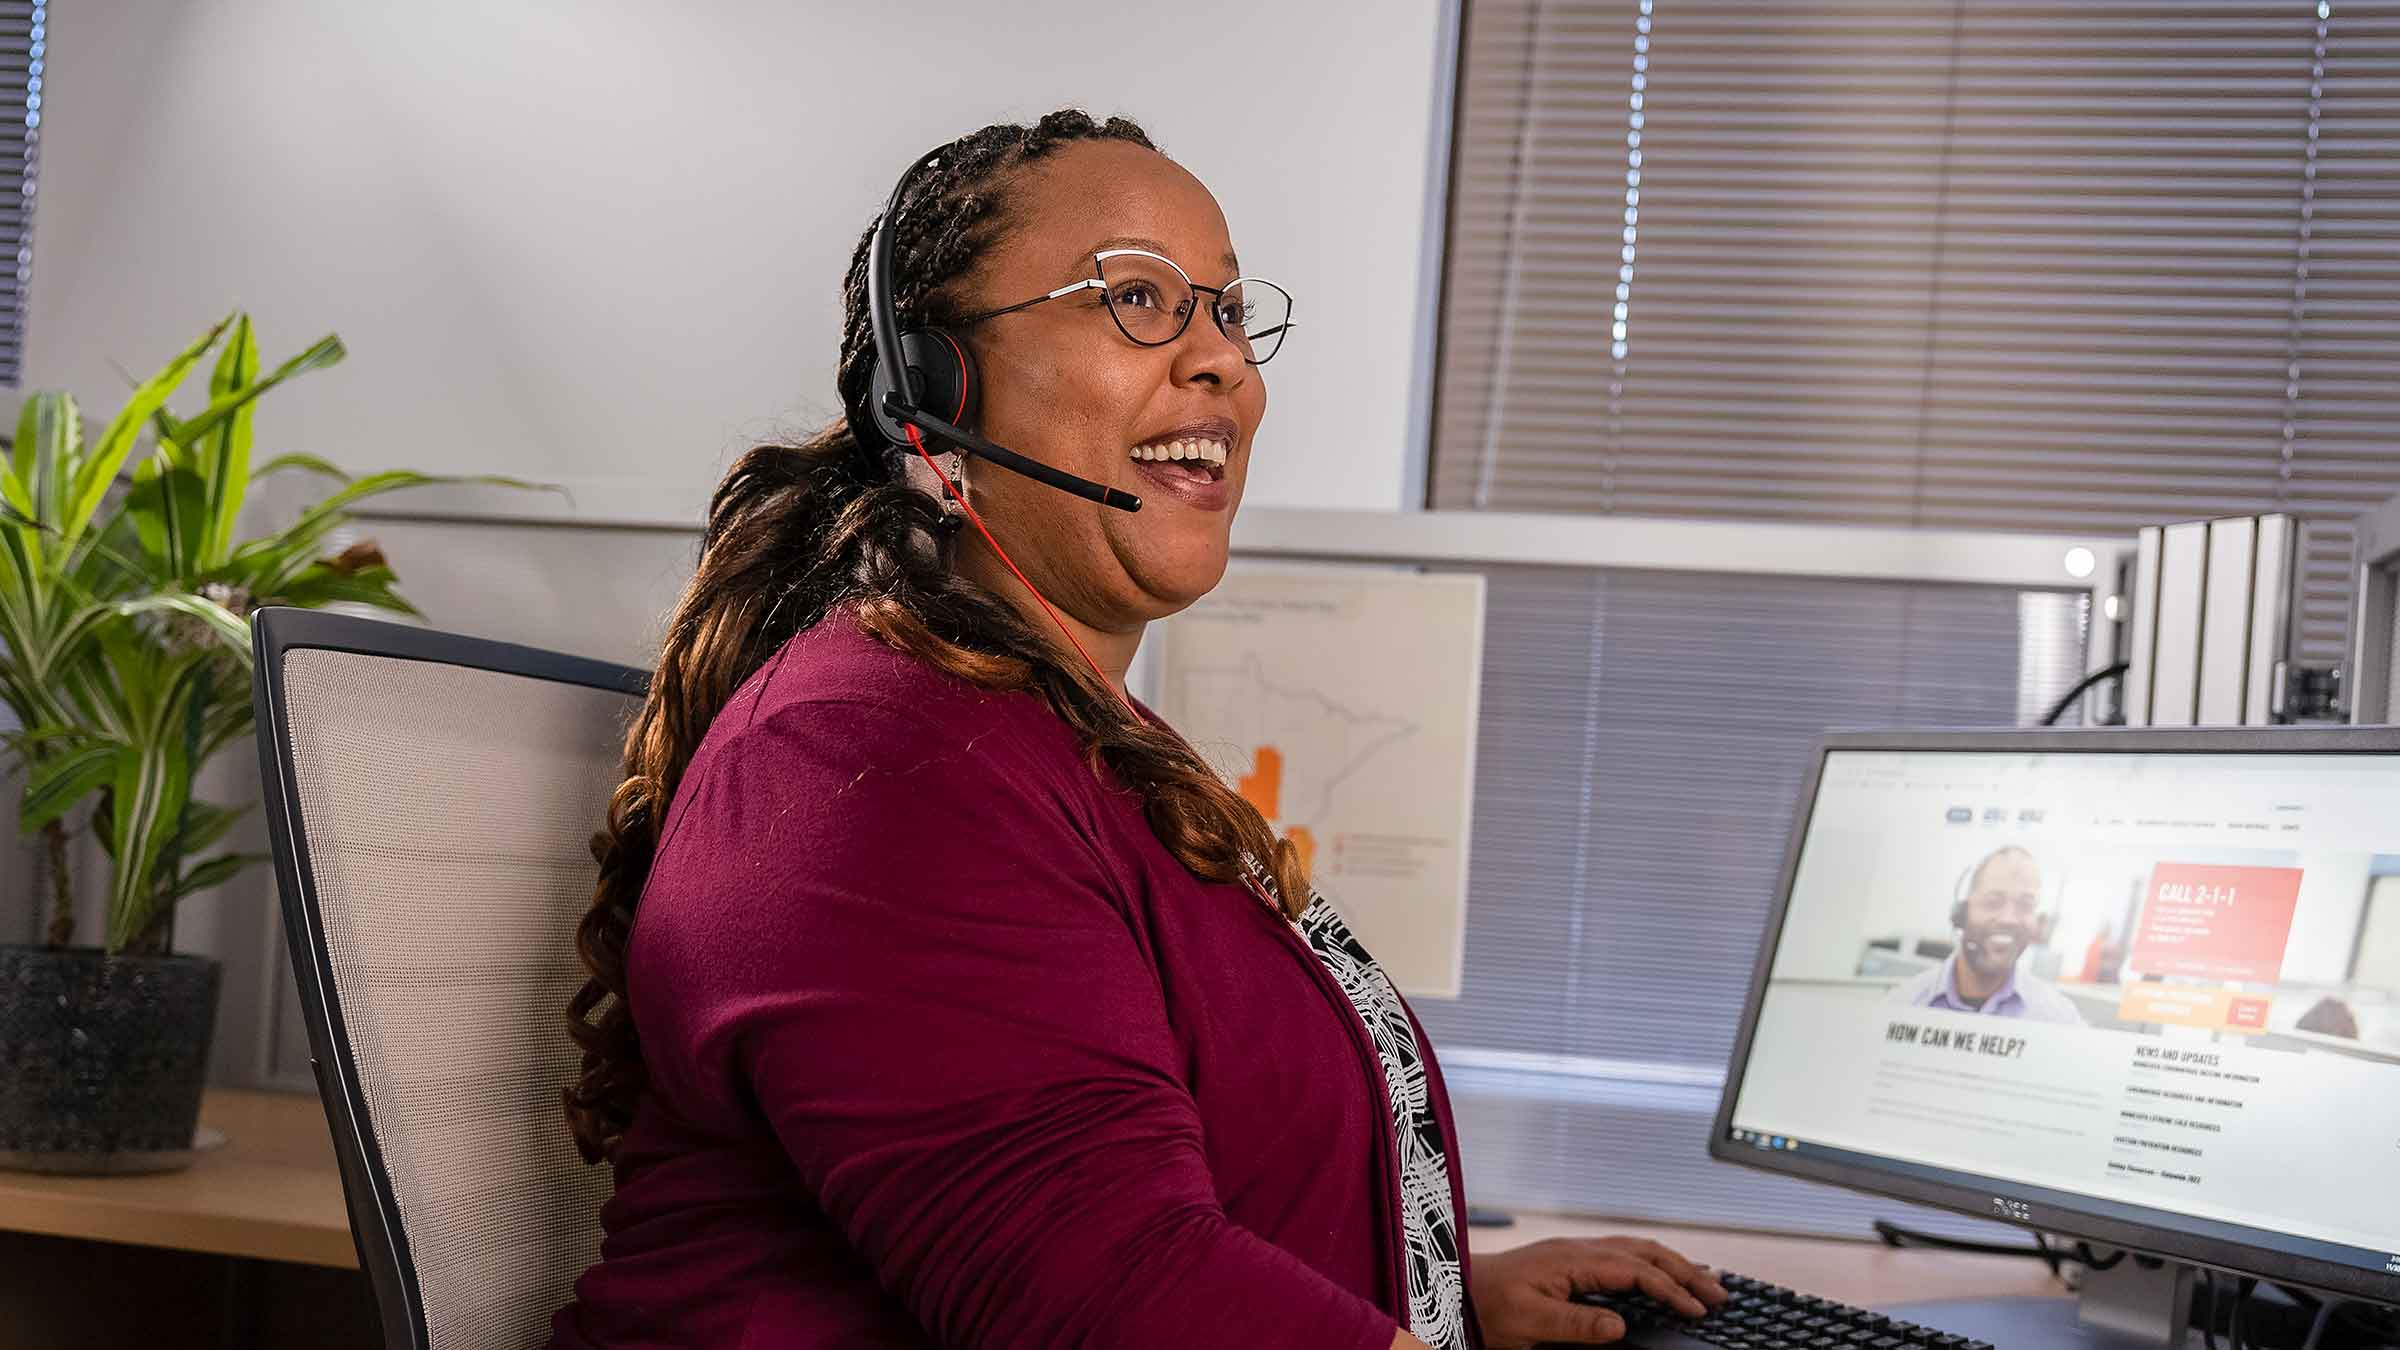 A 211 Resource Helpline Community Resource Specialist is smiling while looking off in the distance